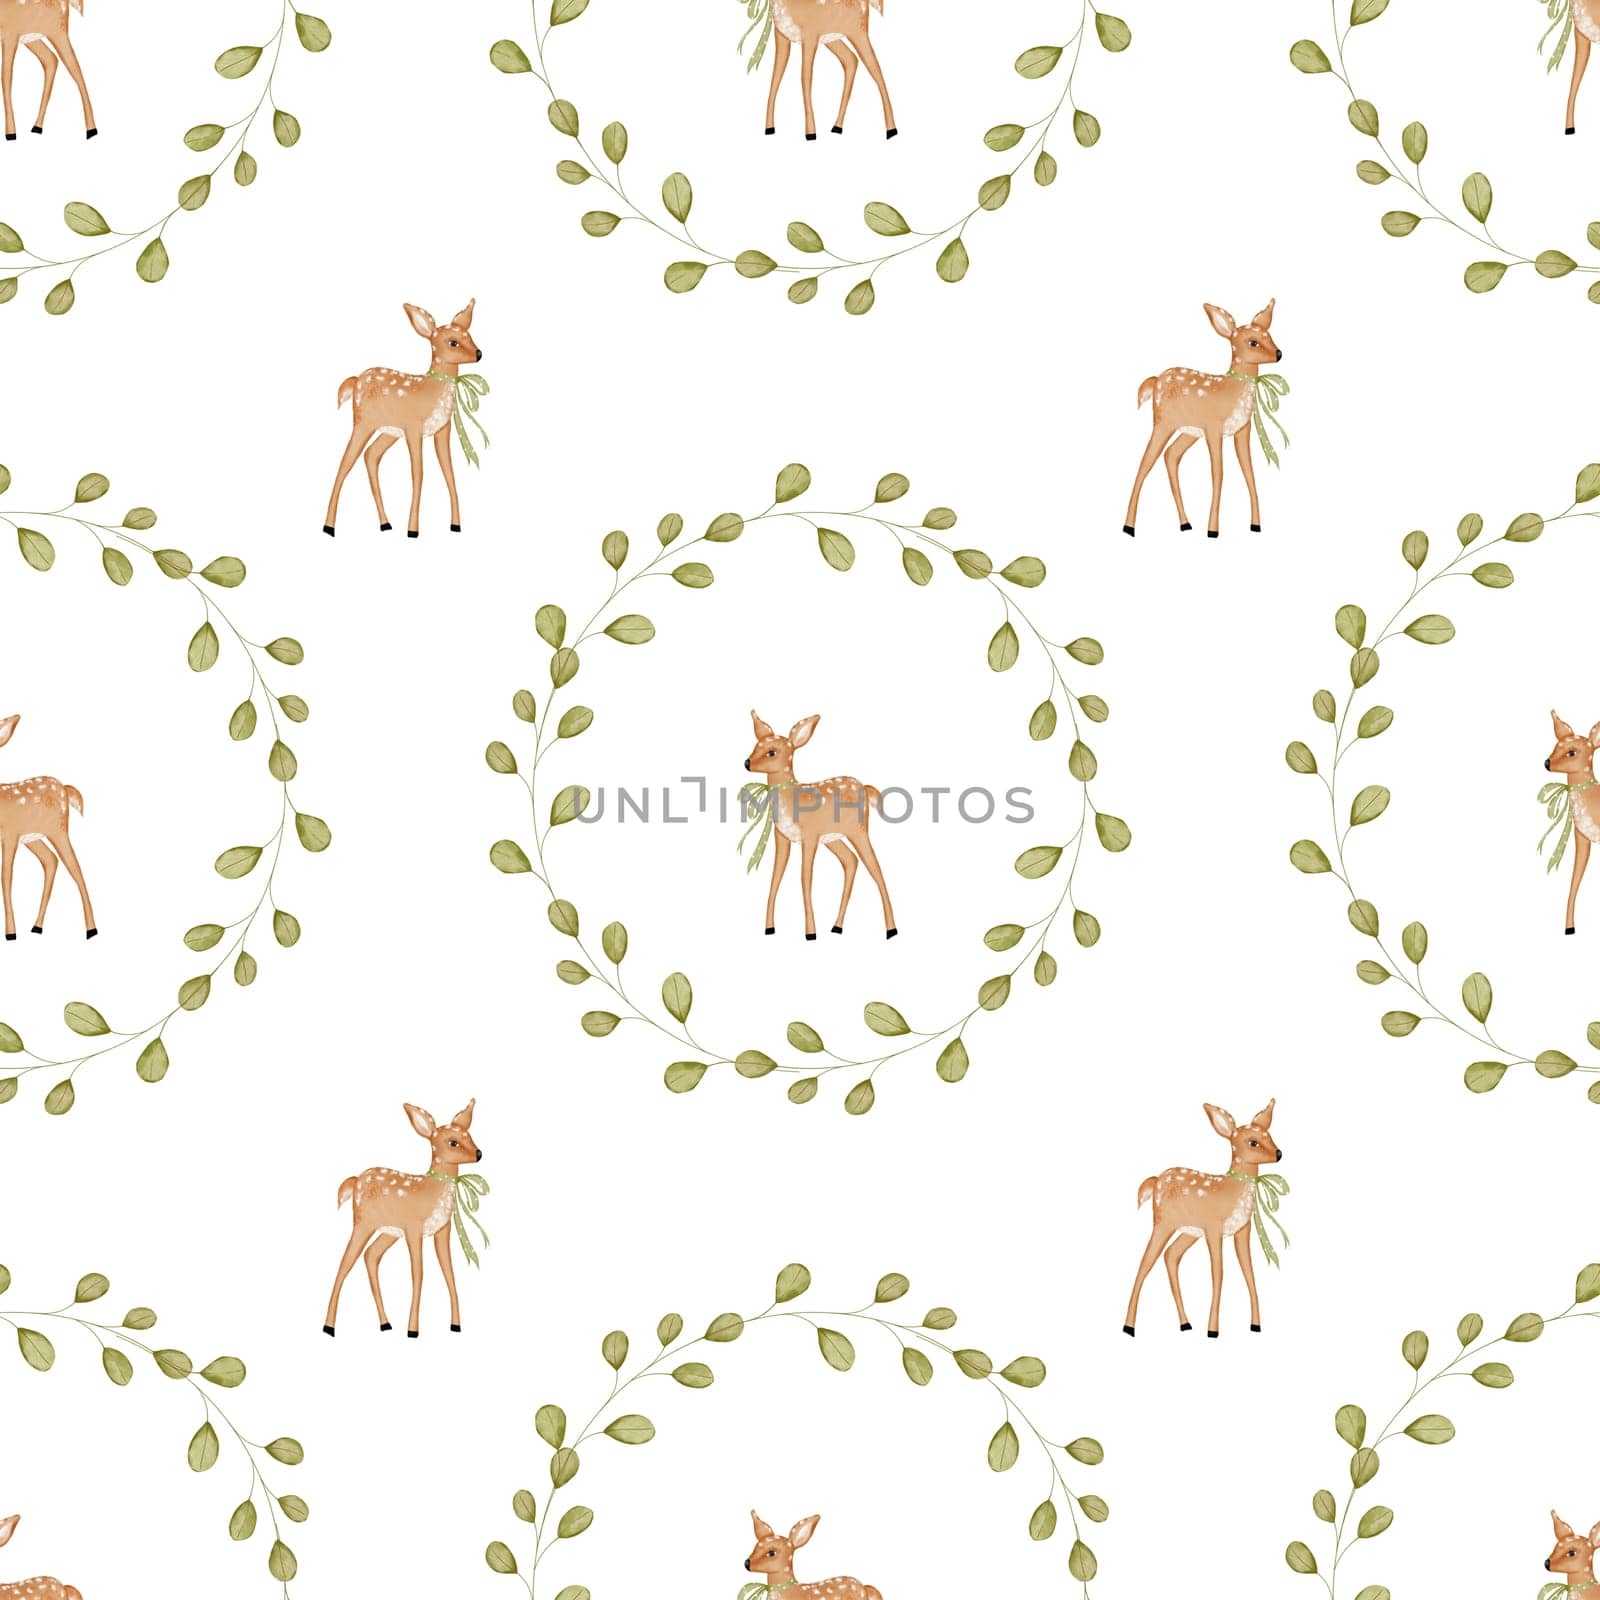 Watercolor seamless baby pattern fawn and branch wreath. Elegant cute animal pattern with bow in round frame. For printing on children's textiles and bedding. by TatyanaTrushcheleva